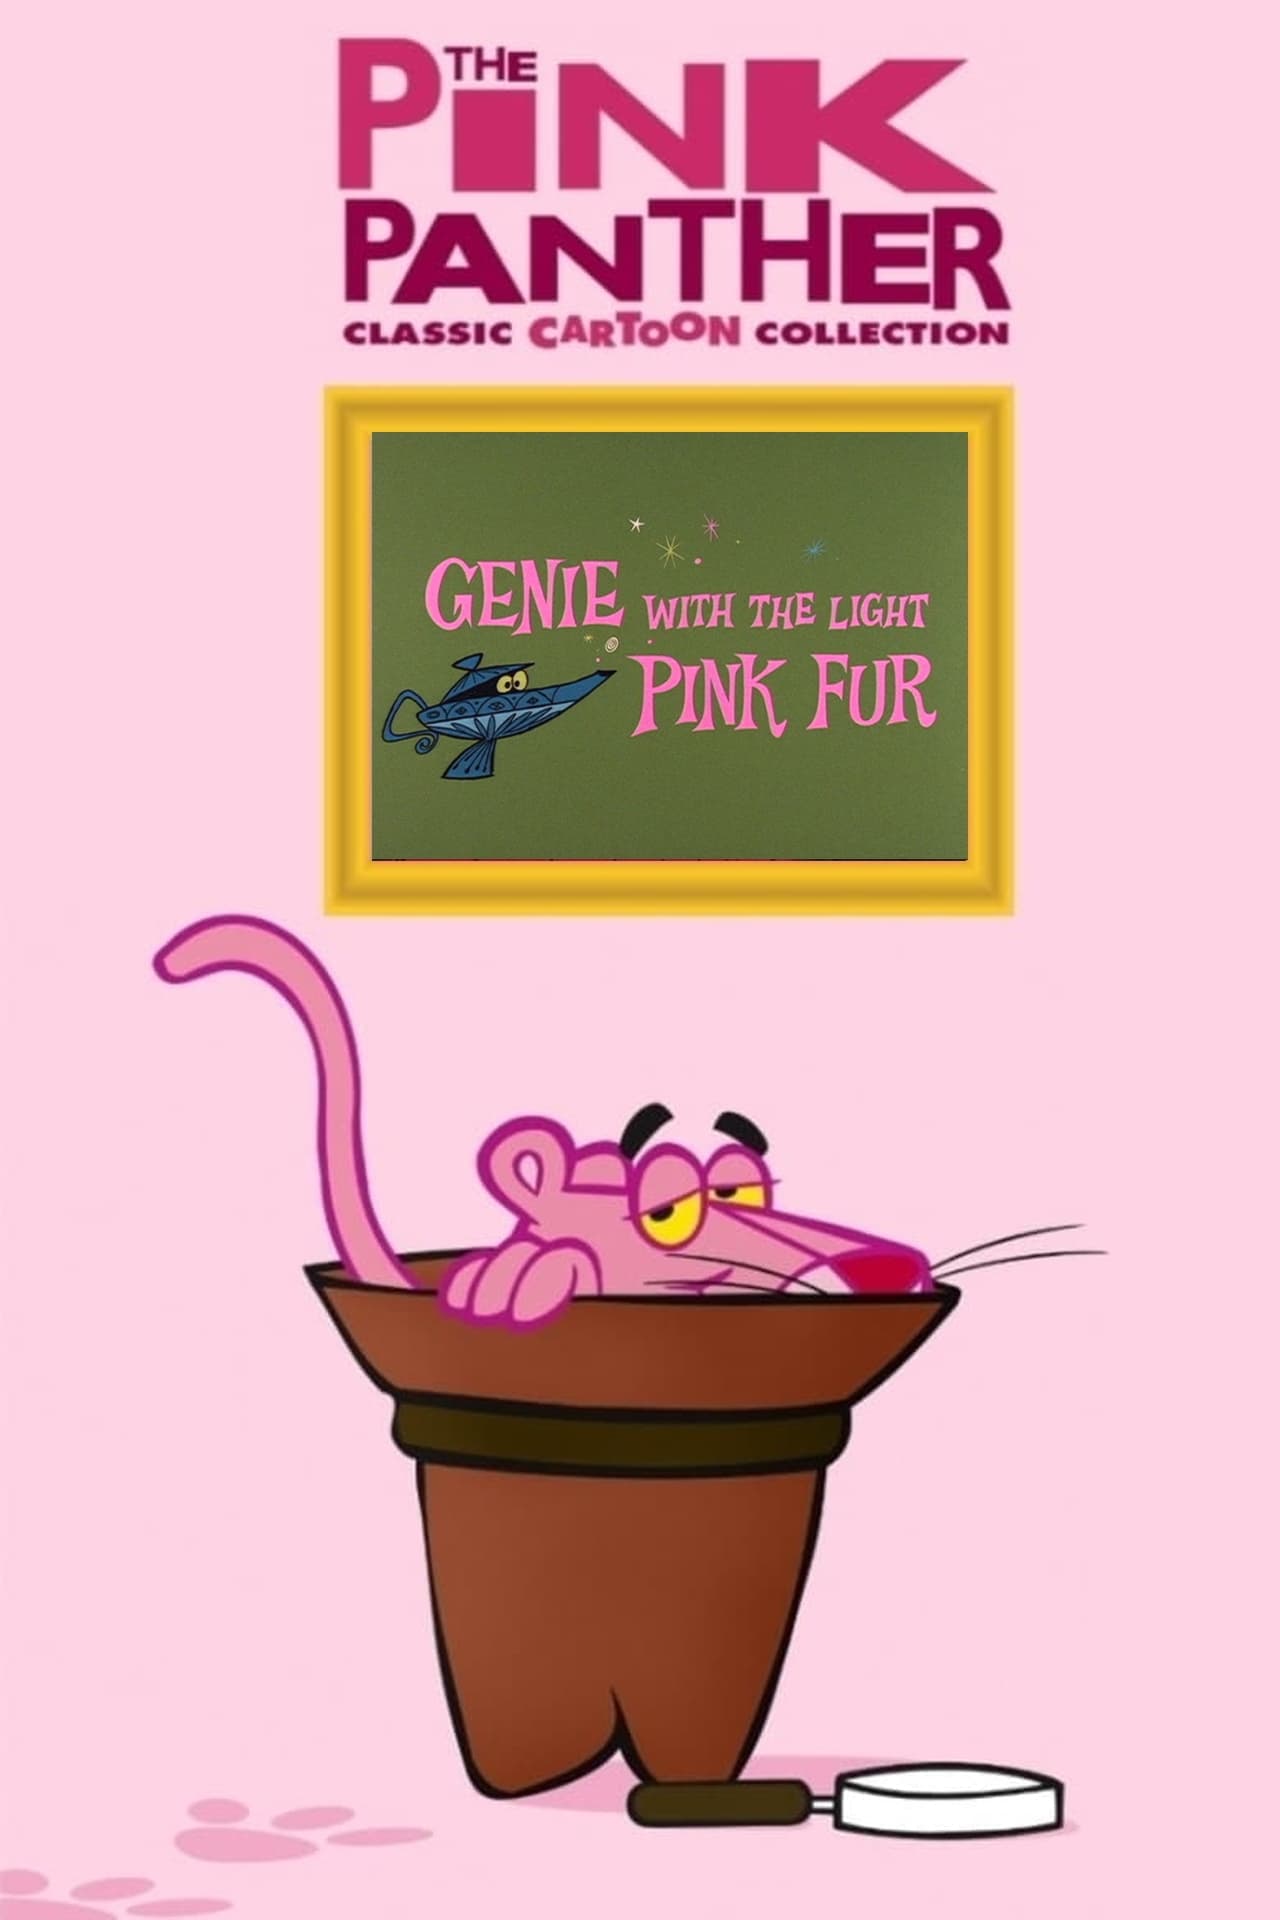 Genie with the Light Pink Fur (1966)